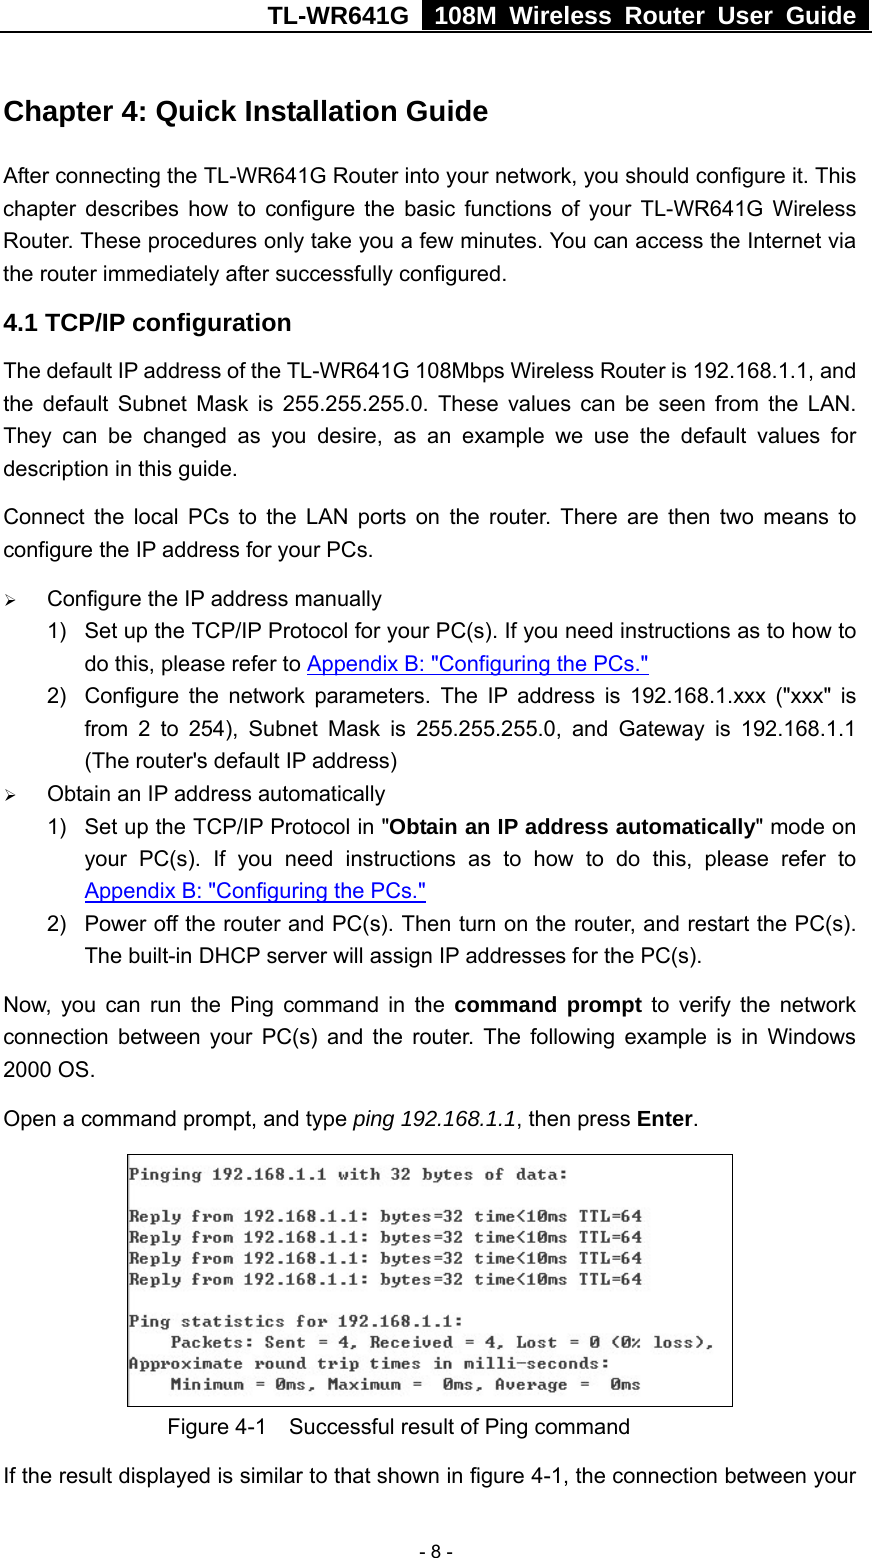 TL-WR641G   108M Wireless Router User Guide   - 8 -Chapter 4: Quick Installation Guide After connecting the TL-WR641G Router into your network, you should configure it. This chapter describes how to configure the basic functions of your TL-WR641G Wireless Router. These procedures only take you a few minutes. You can access the Internet via the router immediately after successfully configured. 4.1 TCP/IP configuration The default IP address of the TL-WR641G 108Mbps Wireless Router is 192.168.1.1, and the default Subnet Mask is 255.255.255.0. These values can be seen from the LAN. They can be changed as you desire, as an example we use the default values for description in this guide. Connect the local PCs to the LAN ports on the router. There are then two means to configure the IP address for your PCs. ¾ Configure the IP address manually 1)  Set up the TCP/IP Protocol for your PC(s). If you need instructions as to how to do this, please refer to Appendix B: &quot;Configuring the PCs.&quot; 2)  Configure the network parameters. The IP address is 192.168.1.xxx (&quot;xxx&quot; is from 2 to 254), Subnet Mask is 255.255.255.0, and Gateway is 192.168.1.1 (The router&apos;s default IP address) ¾ Obtain an IP address automatically 1)  Set up the TCP/IP Protocol in &quot;Obtain an IP address automatically&quot; mode on your PC(s). If you need instructions as to how to do this, please refer to Appendix B: &quot;Configuring the PCs.&quot; 2)  Power off the router and PC(s). Then turn on the router, and restart the PC(s). The built-in DHCP server will assign IP addresses for the PC(s). Now, you can run the Ping command in the command prompt to verify the network connection between your PC(s) and the router. The following example is in Windows 2000 OS. Open a command prompt, and type ping 192.168.1.1, then press Enter.              Figure 4-1    Successful result of Ping command If the result displayed is similar to that shown in figure 4-1, the connection between your 